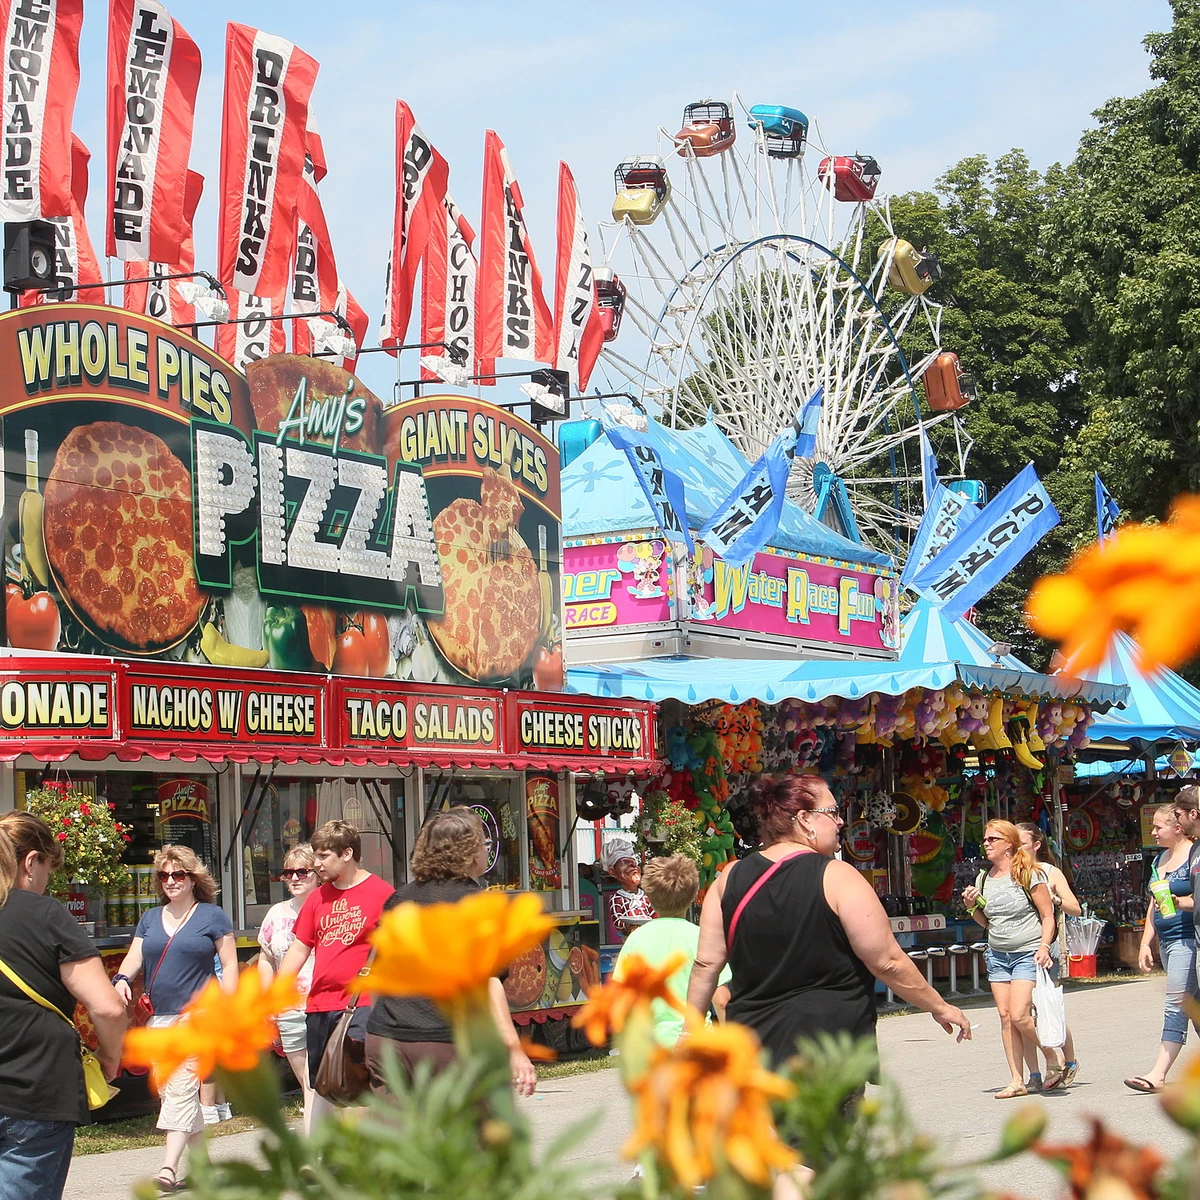 When Are the County Fairs Happening in the Hudson Valley in 2018?